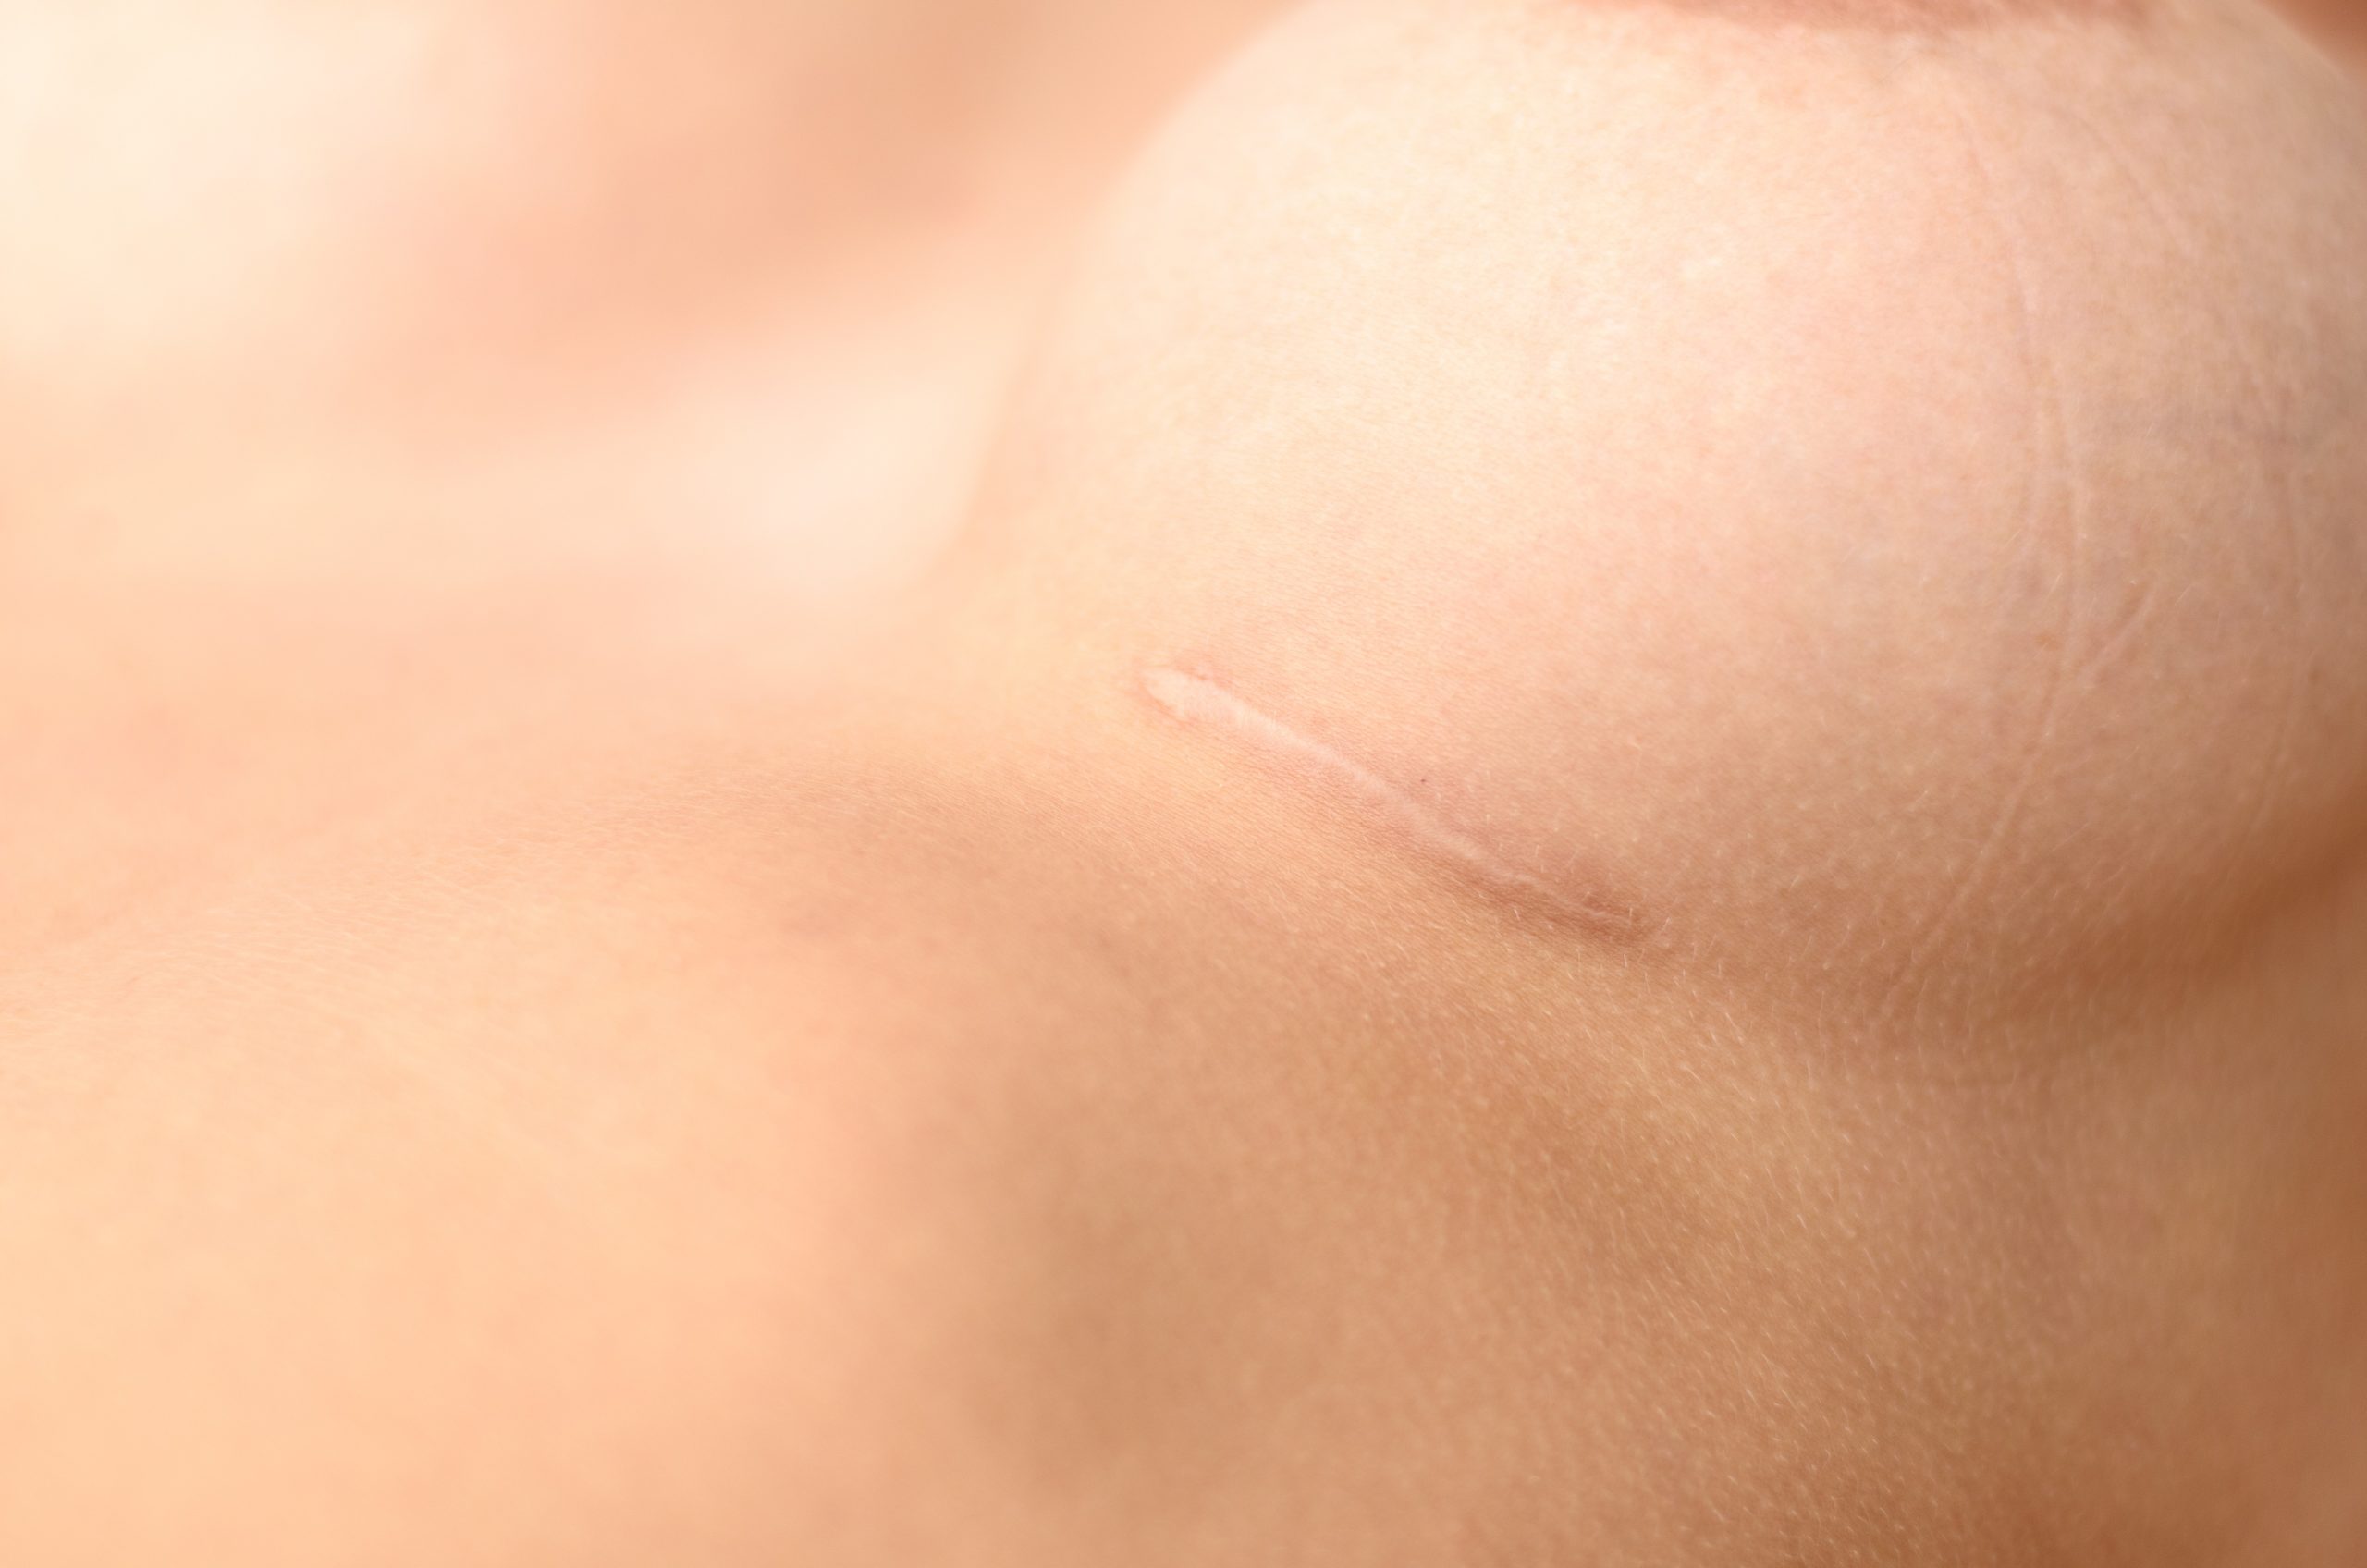 How Can You Reduce the Appearance of Scars?